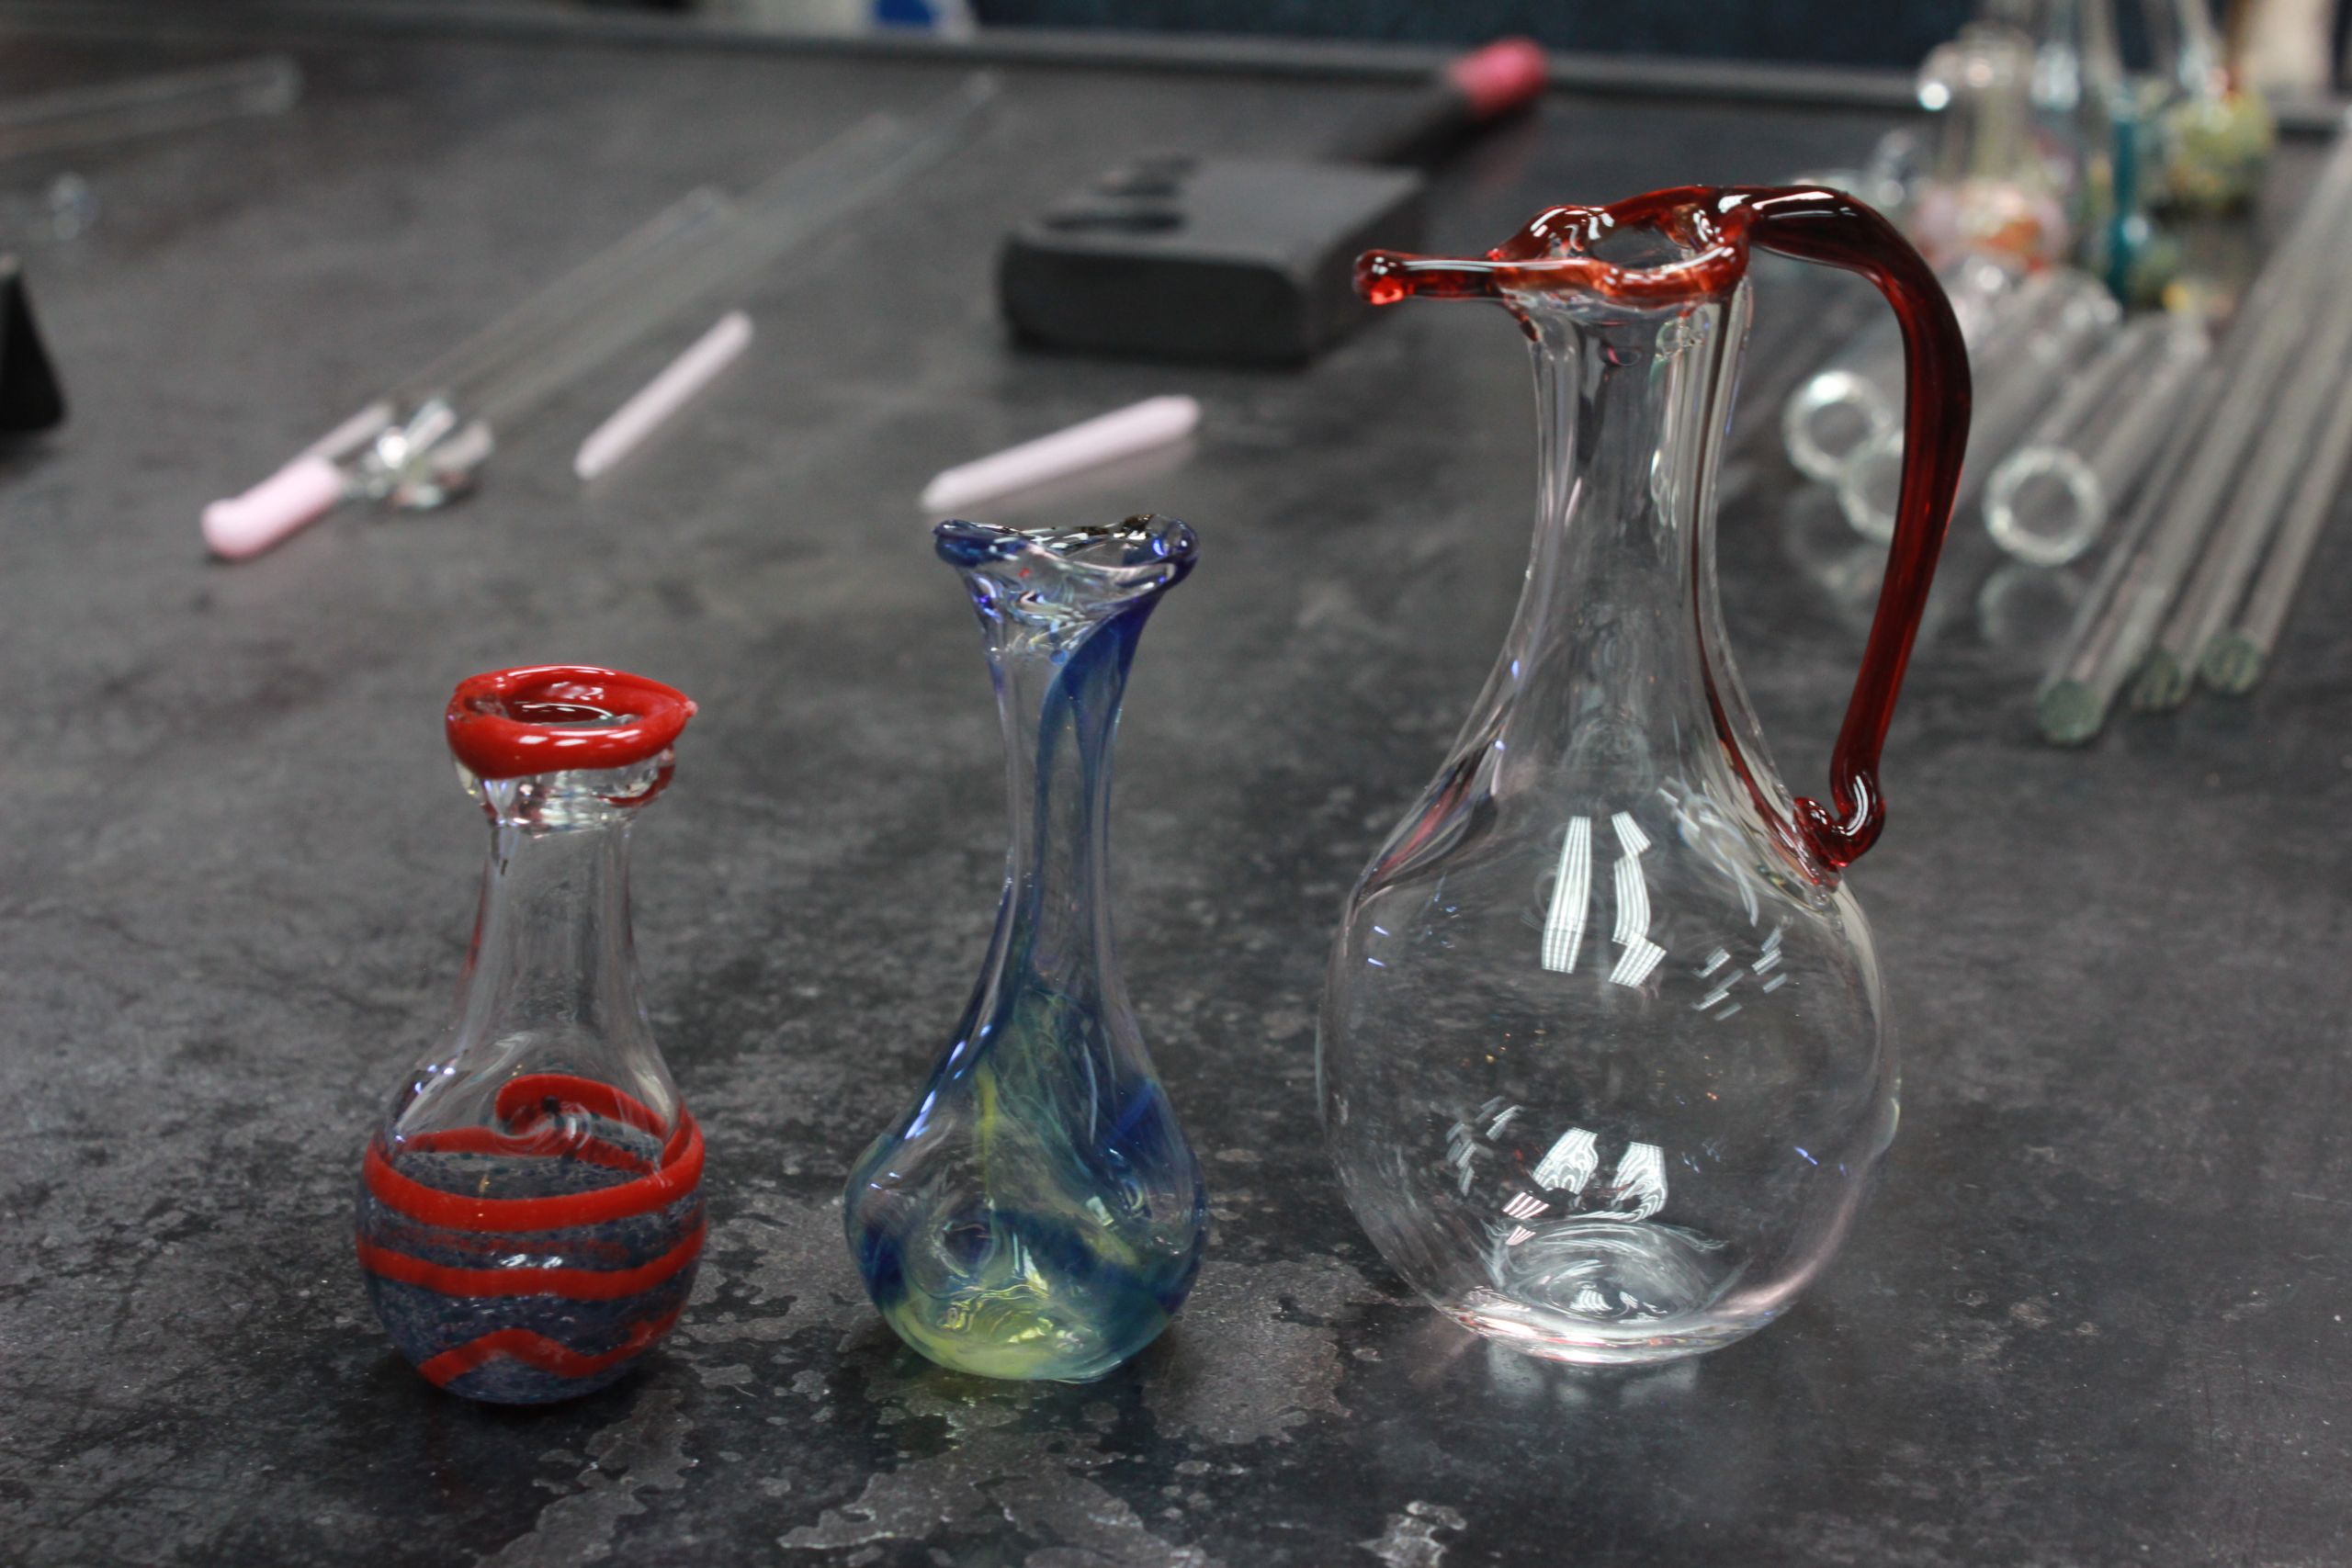 Home Glass Blowing Setup Guide 2024 (What Do You Need?) - Working the Flame